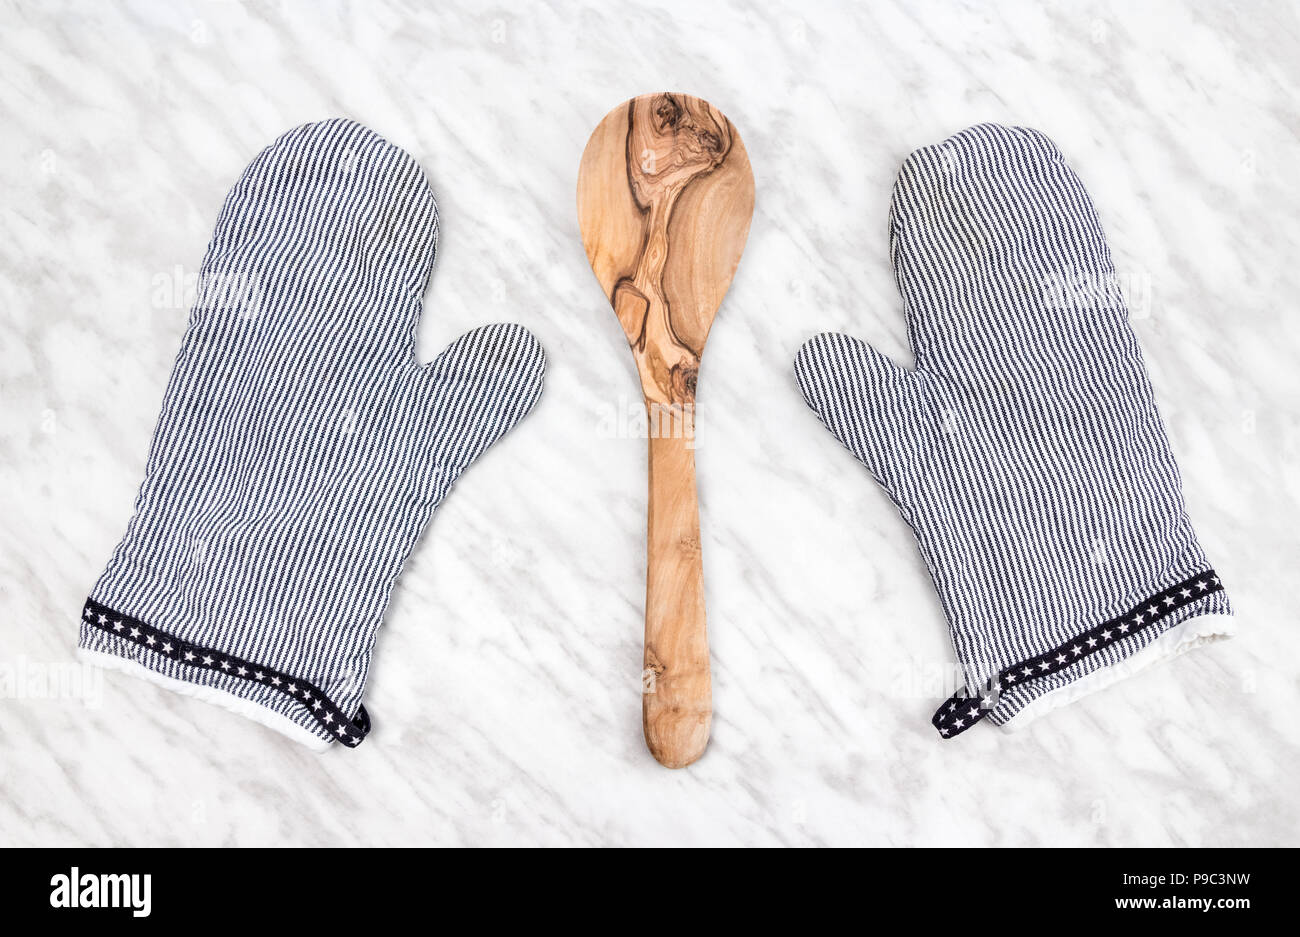 Wooden spoon and striped kitchen gloves, on a marble countertop. Stock Photo